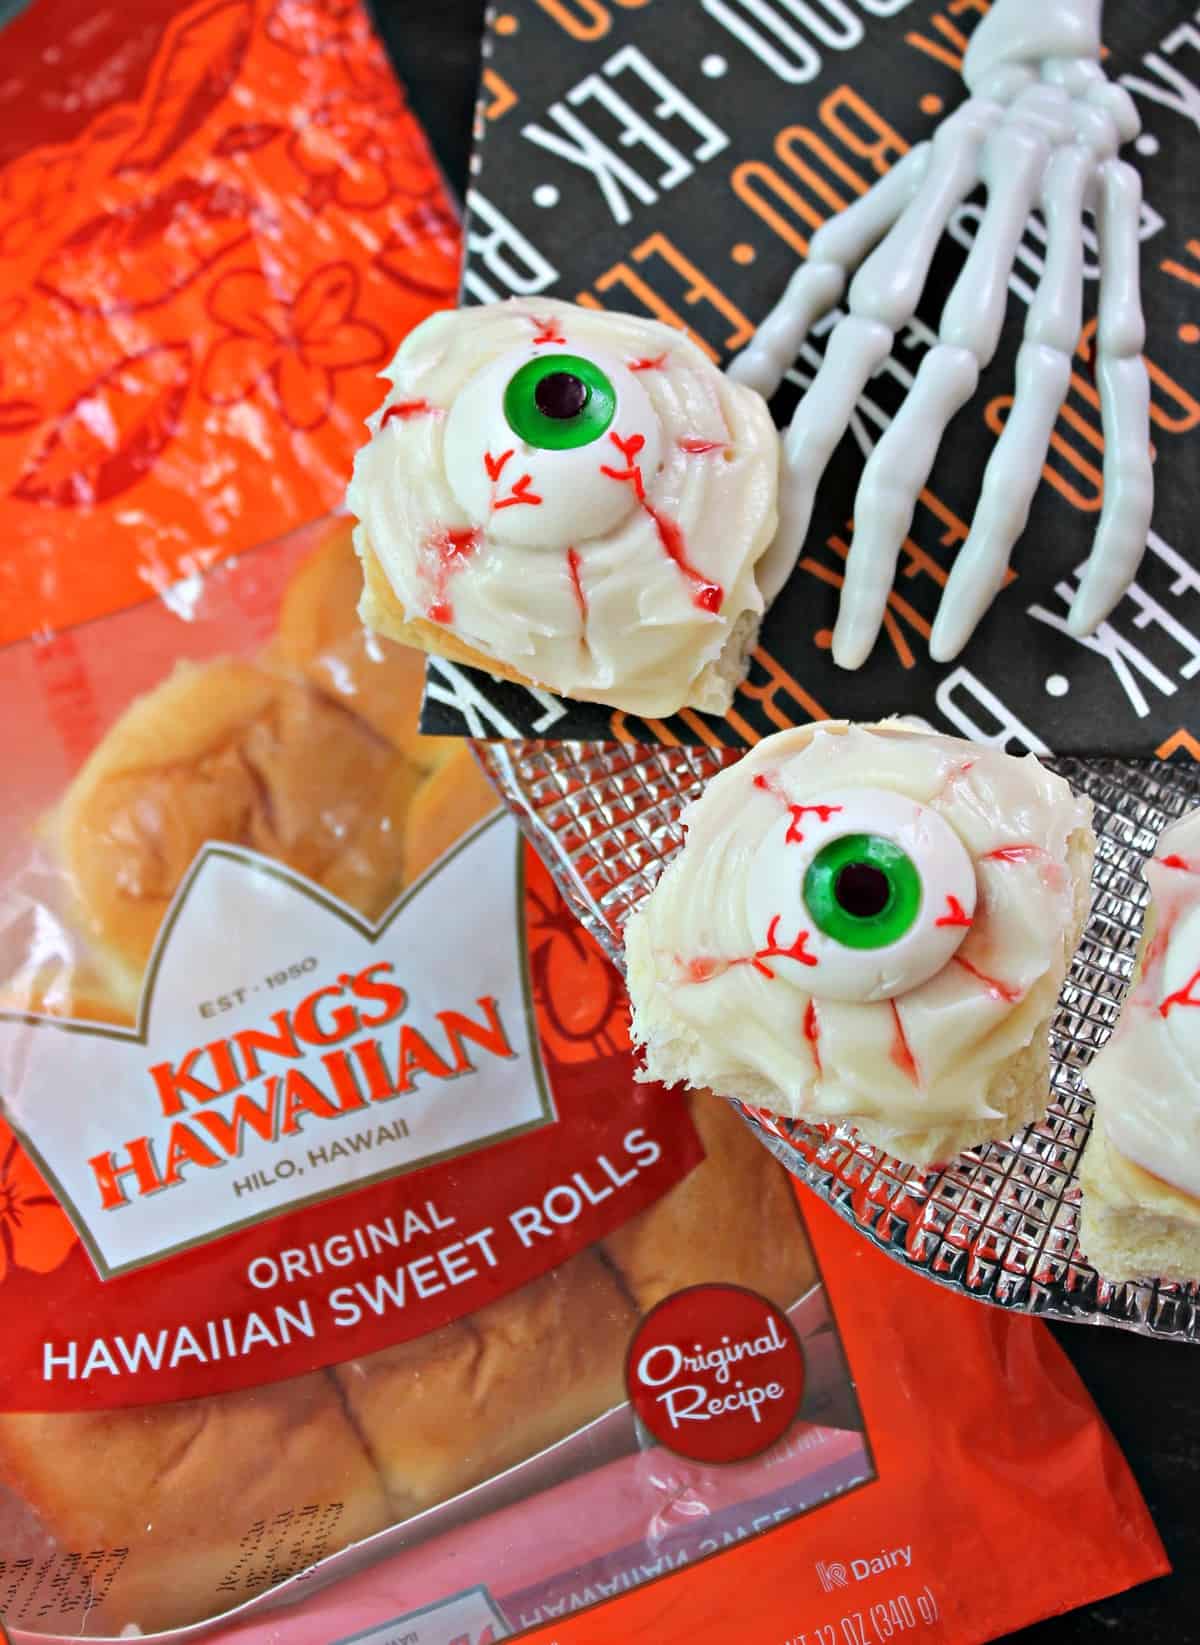 Spooky Eyeball Sweet Rolls! Need something quick and easy to make for Halloween festivities? These ooey, gooey, no-bake sweet rolls come together quickly with the help of King's Hawaiian Dinner Rolls! Filled with raspberry jam and topped with a creamy glaze and gummy eyeballs, they'll become your family's favorite creepy treat! 